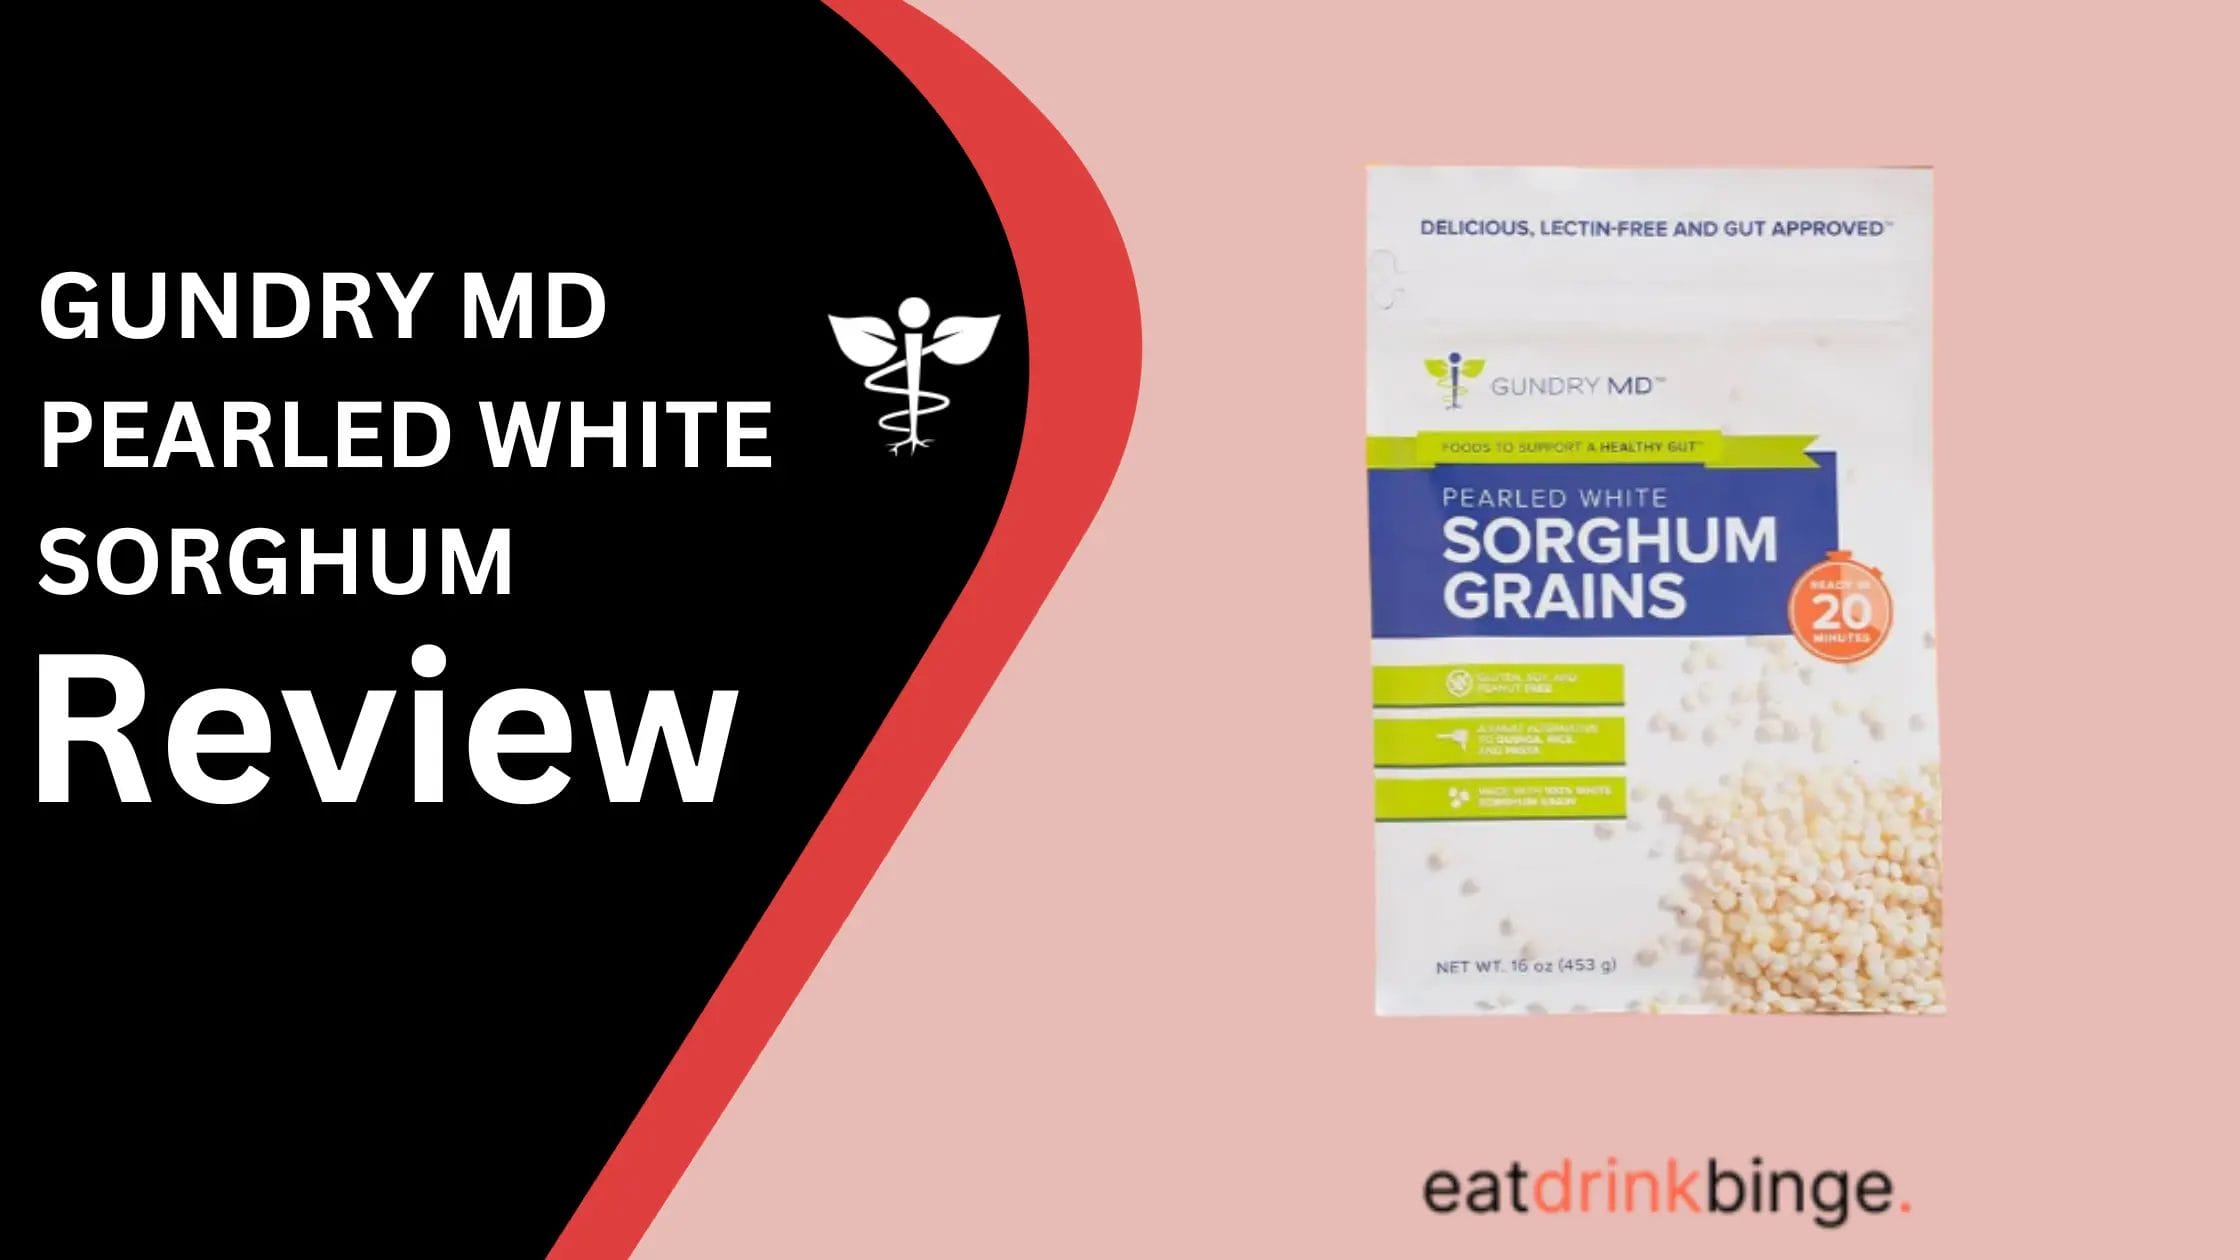 Pearled White Sorghum Review